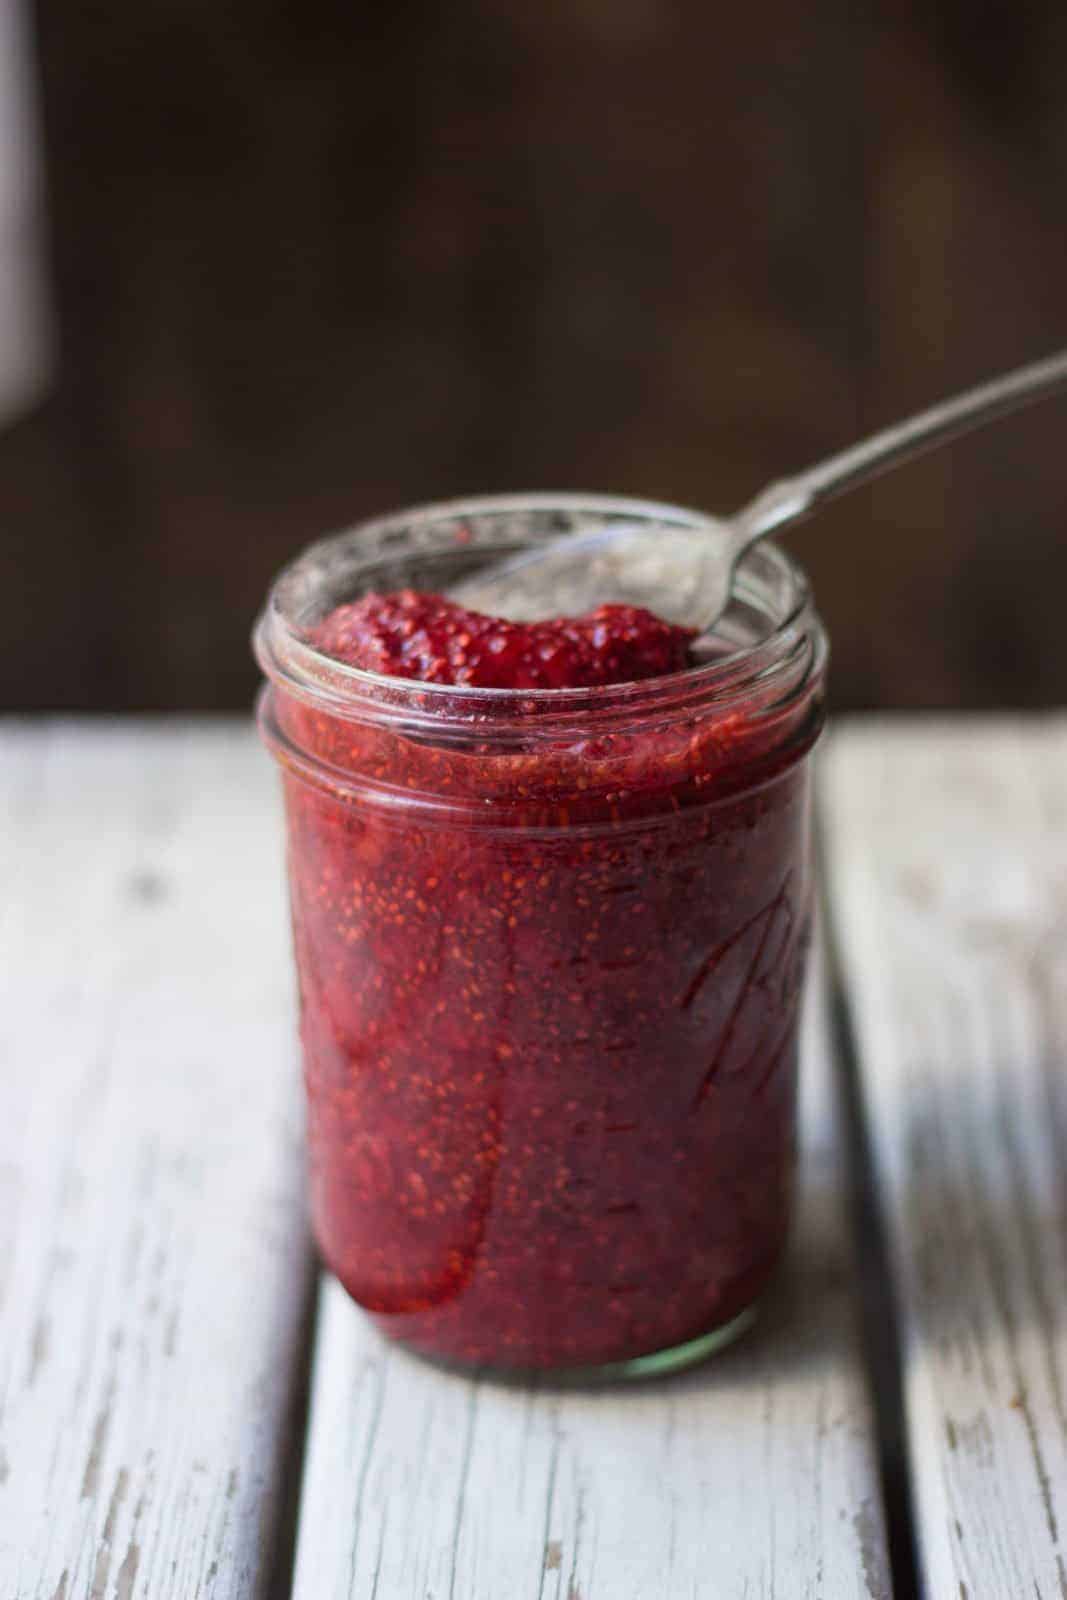 Strawberry jam in a clear jar with a silver spoon in it.